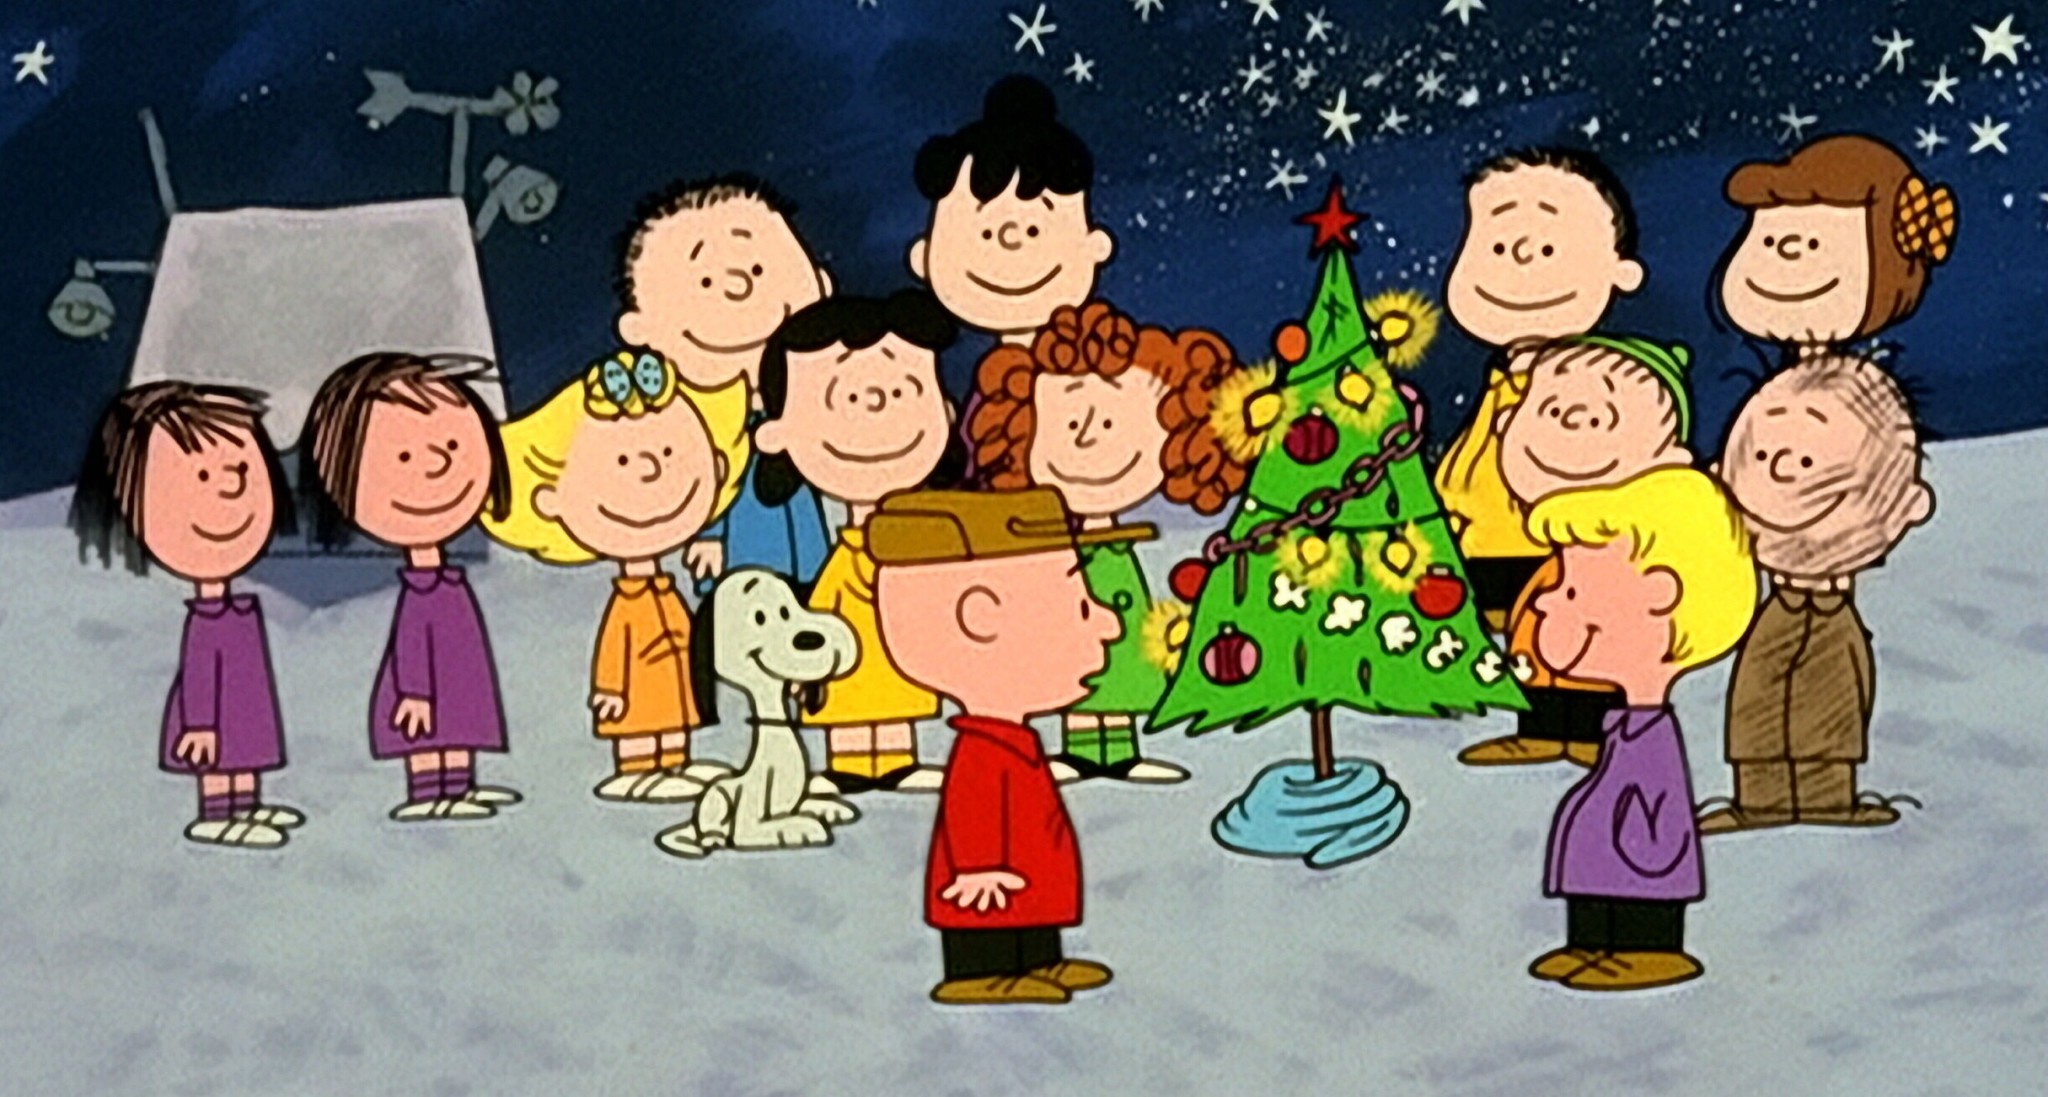 How to Watch the Charlie Brown Holiday Specials